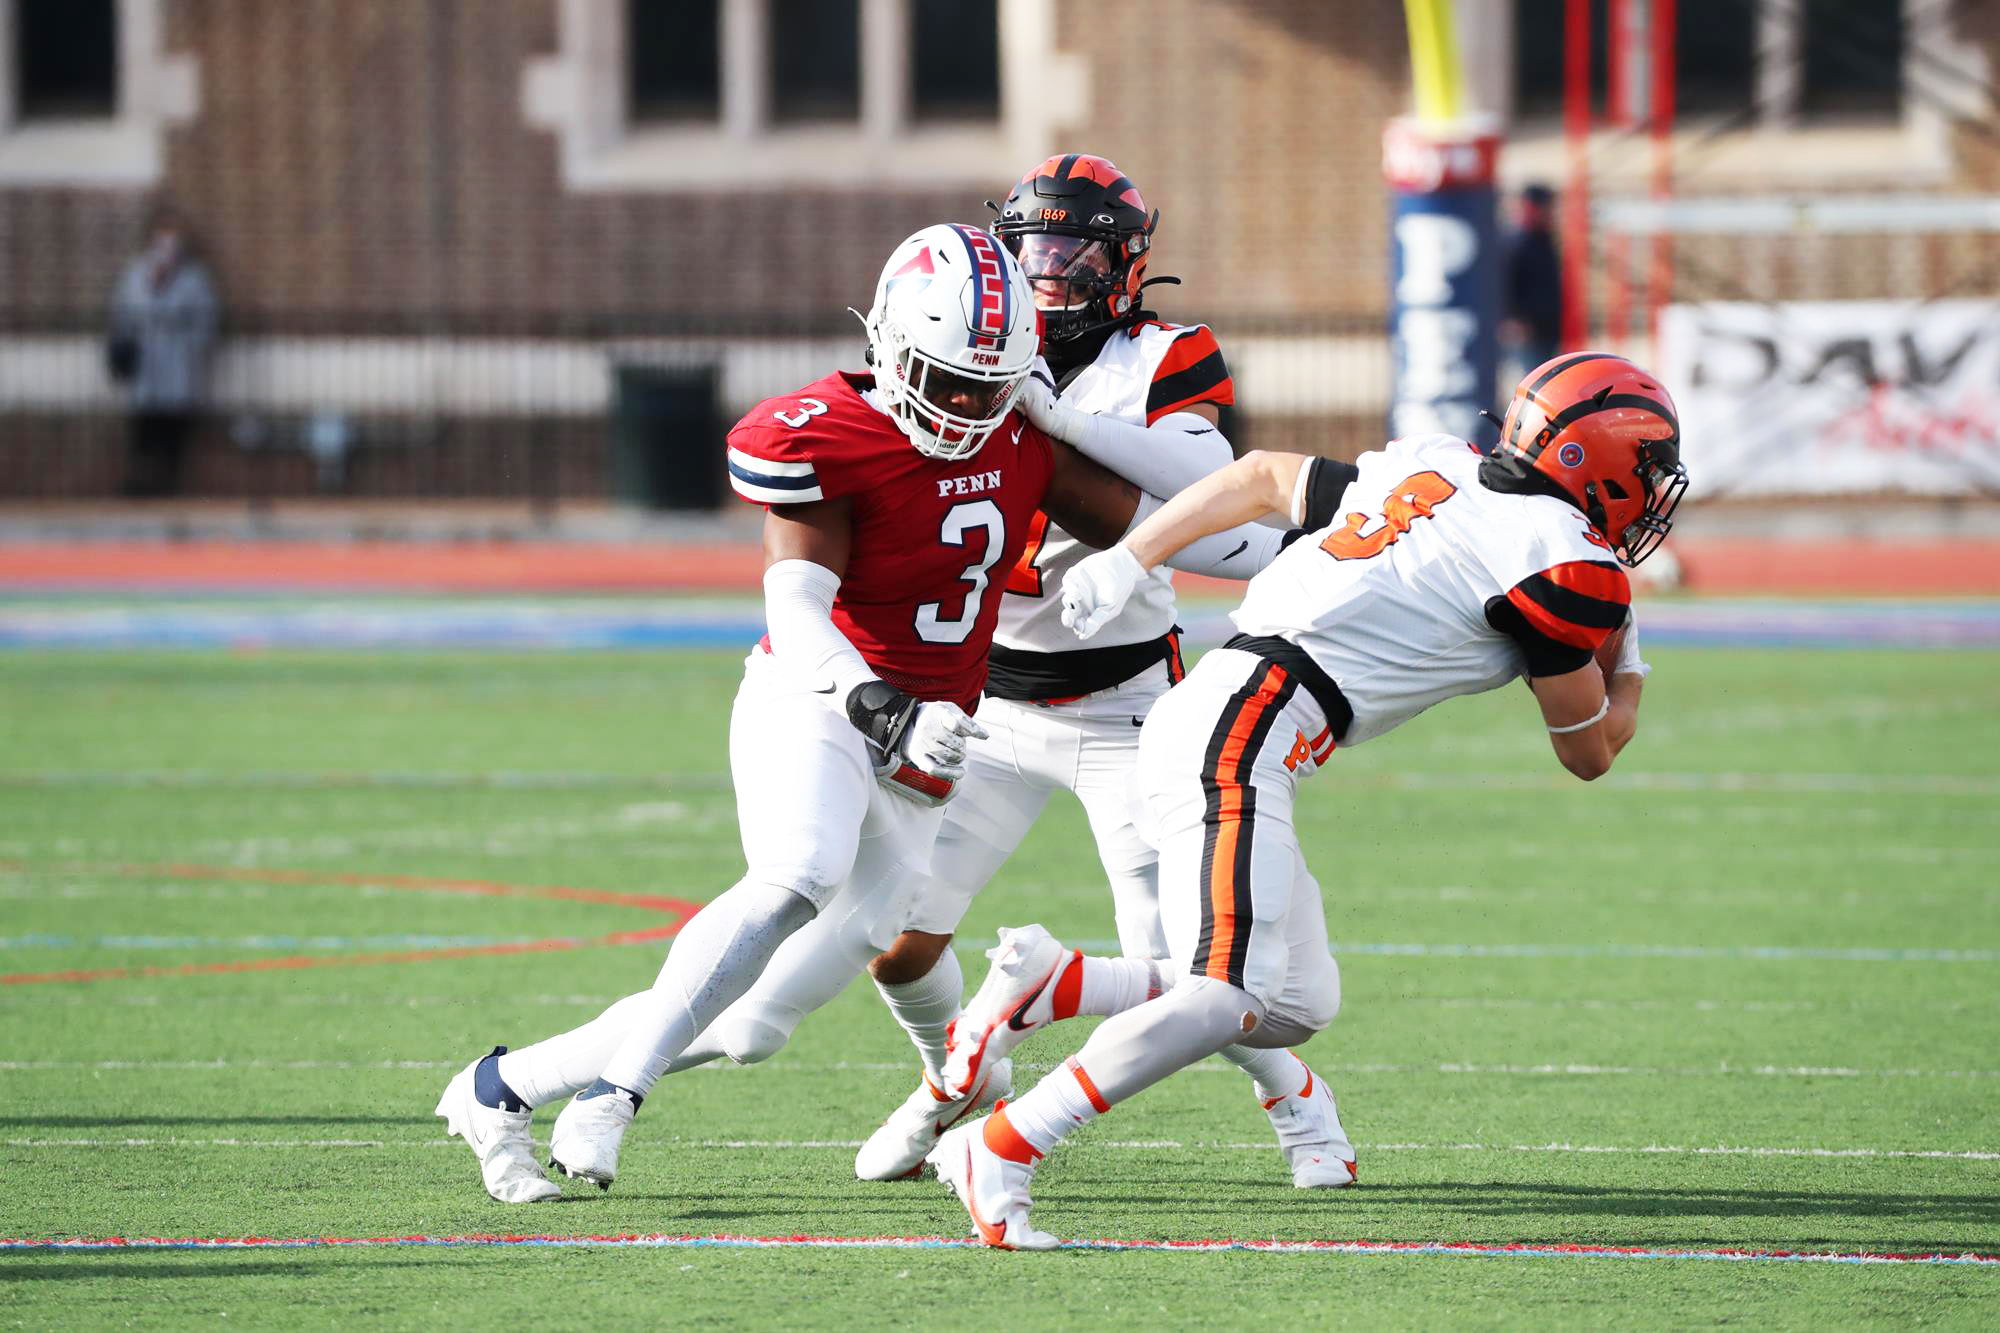 Jonathan Melvin chases down a Princeton ball carrier during a game at Franklin Field.